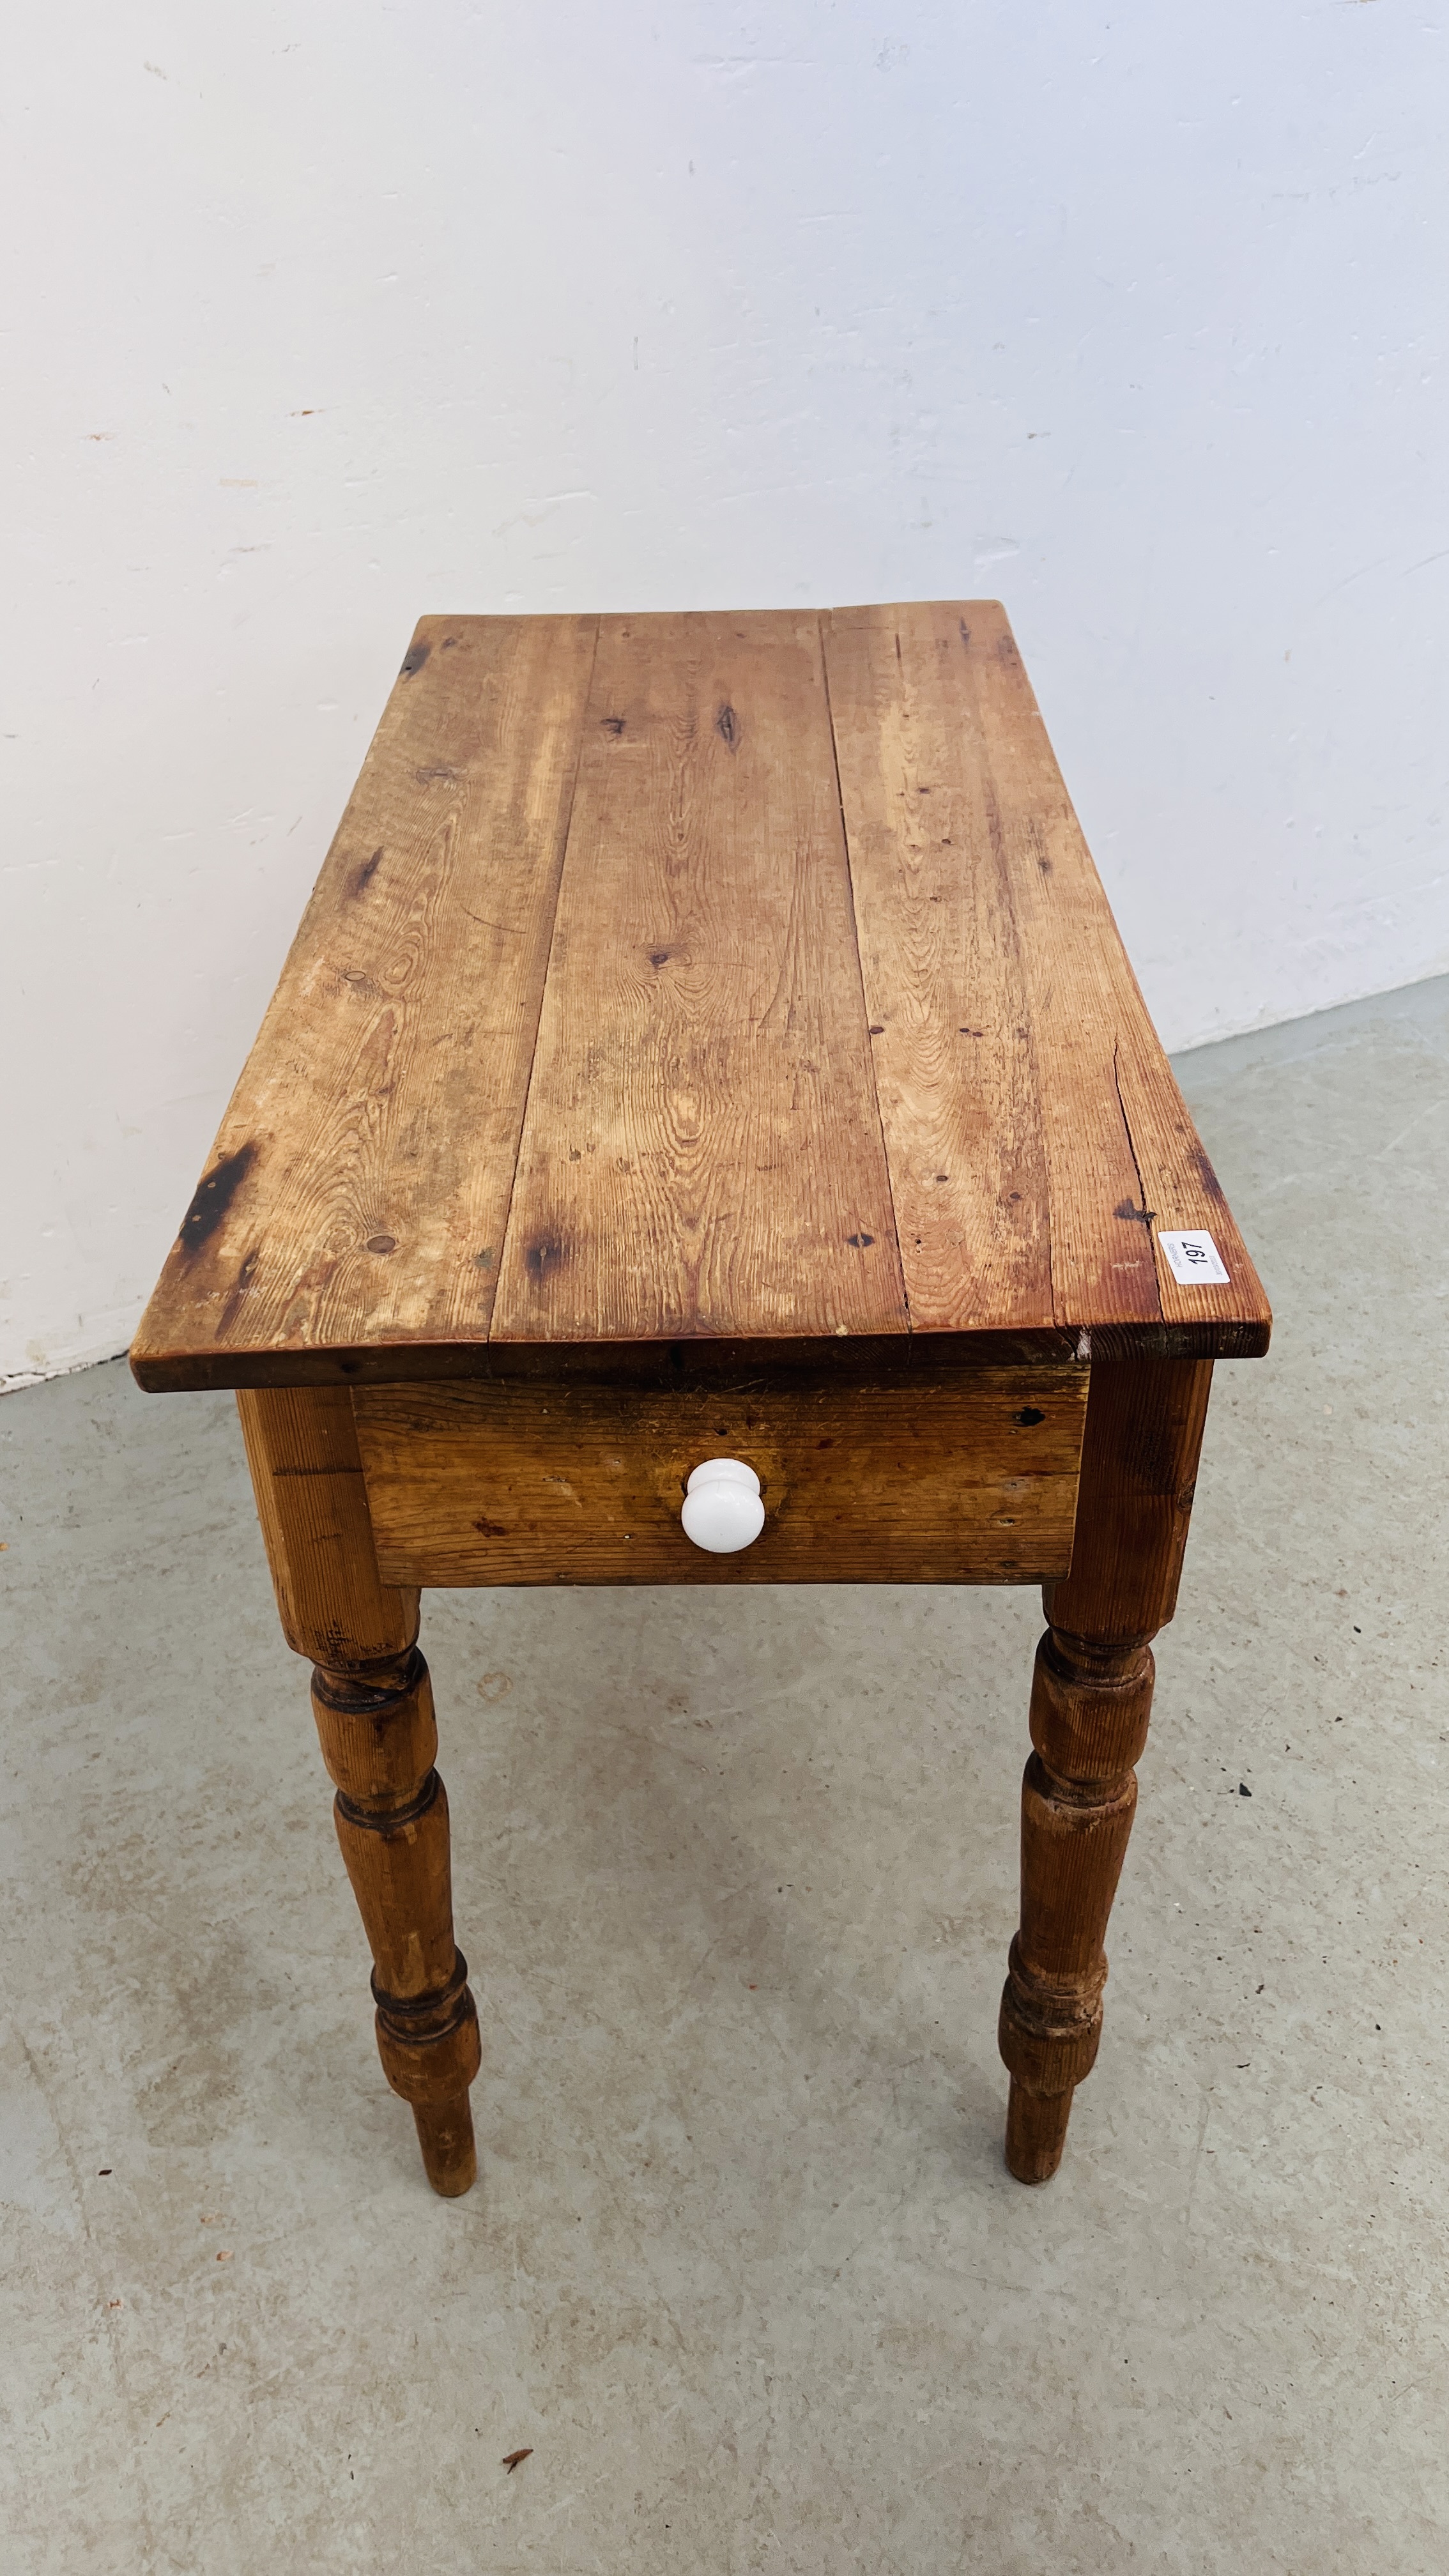 ANTIQUE WAXED PINE KITCHEN TABLE WITH DRAWER TO END, W 92CM, D 45CM. - Image 8 of 8